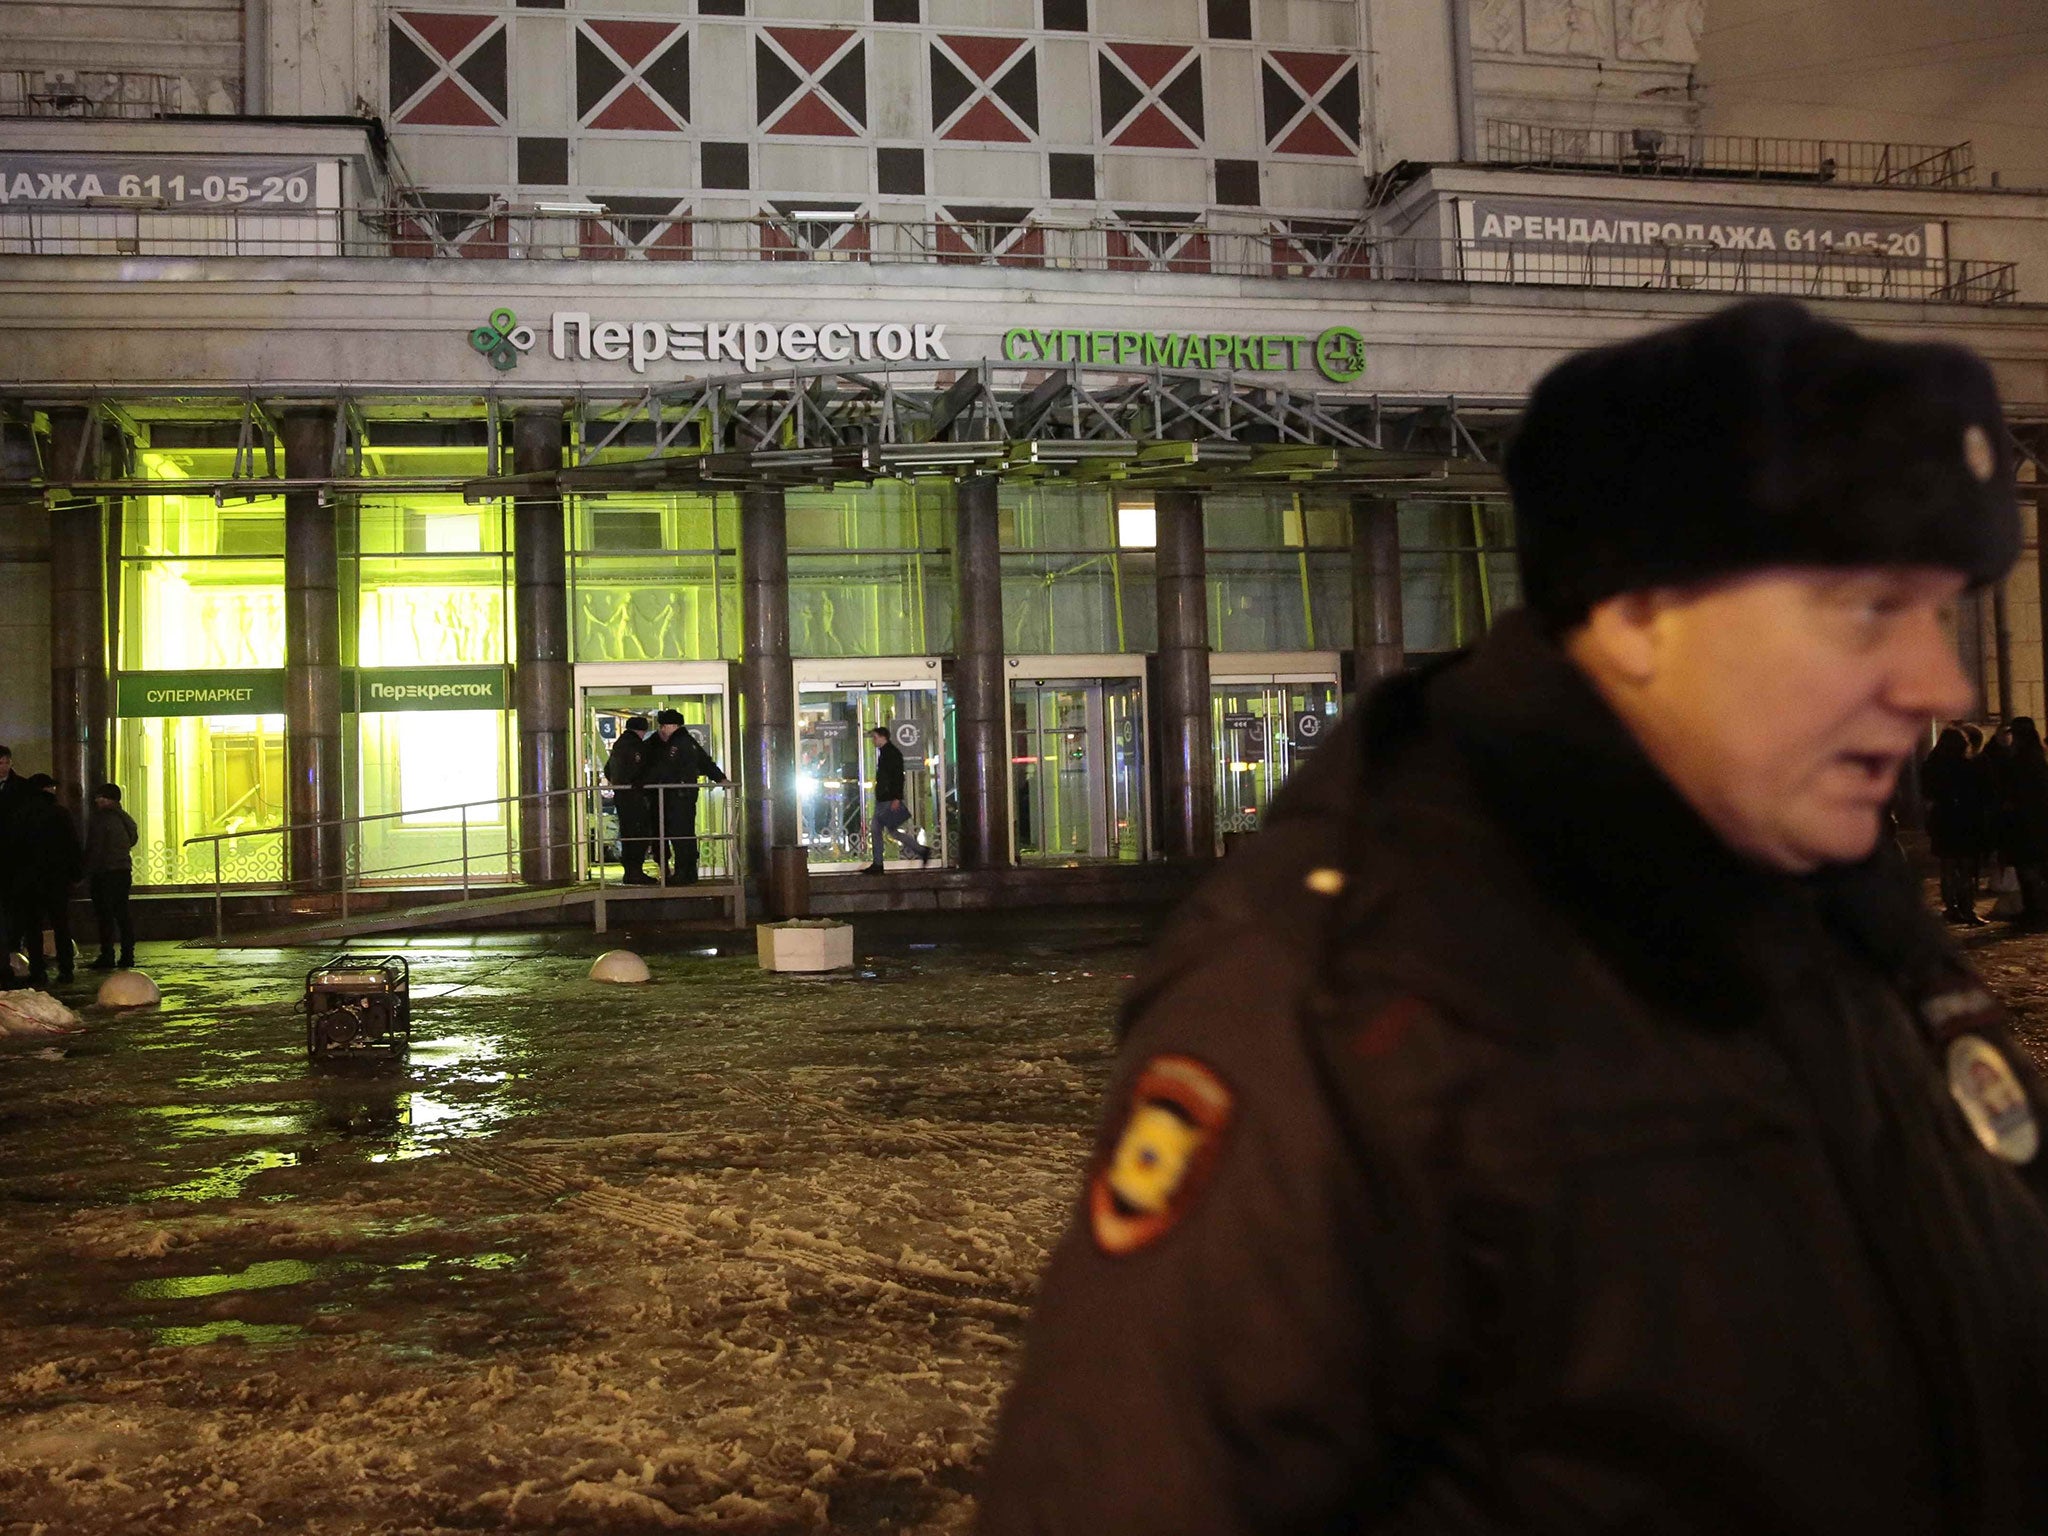 A policeman stands guard near a supermarket after an explosion in St Petersburg, Russia on 27 December, 2017